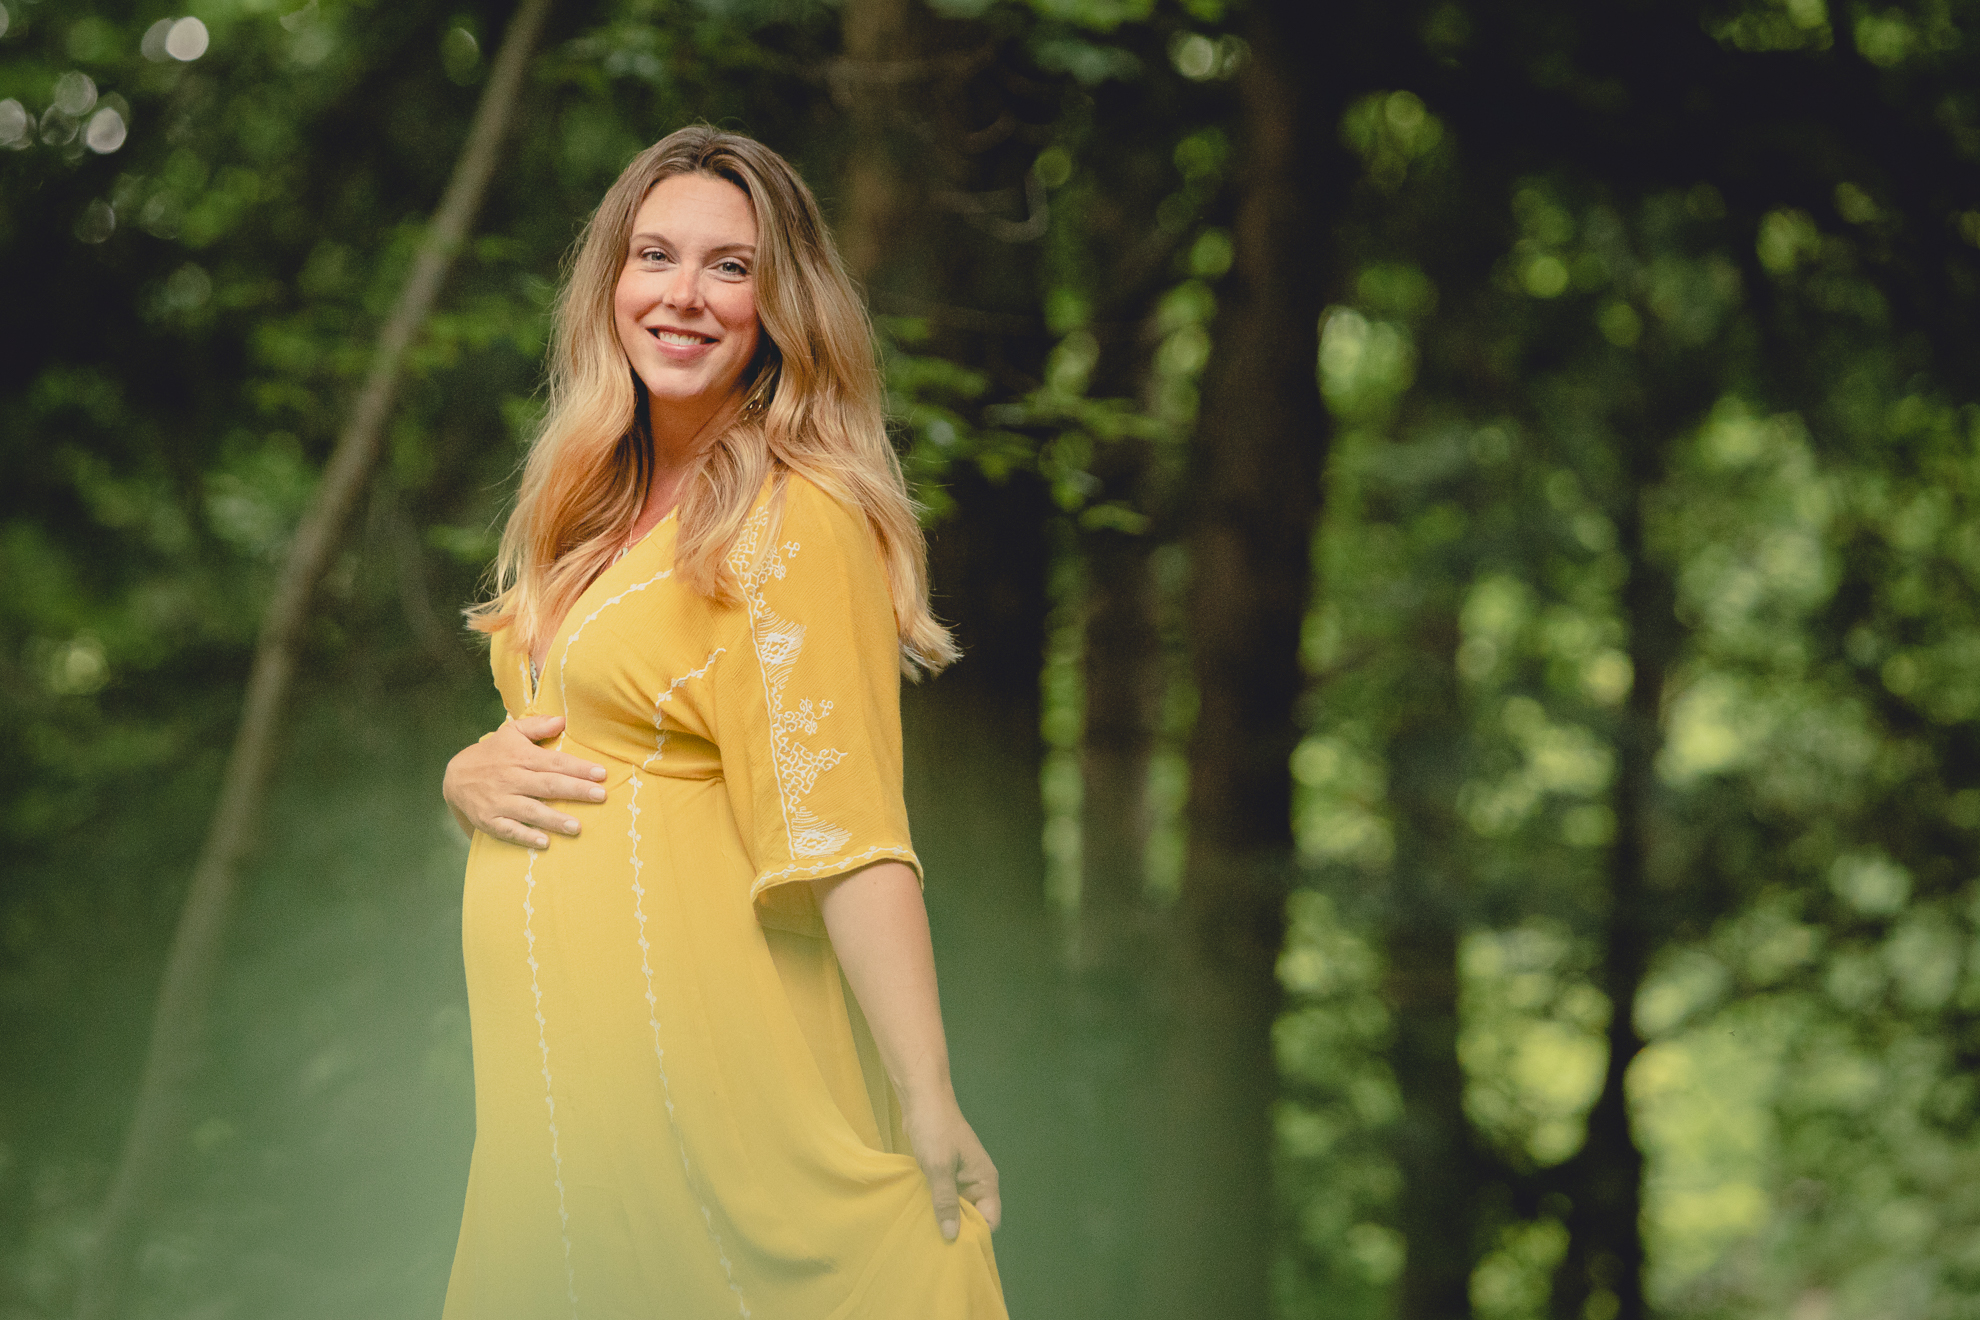 maternity portrait of pregnant woman smiling for photographer in forest at Chestnut Ridge Park near Buffalo, NY